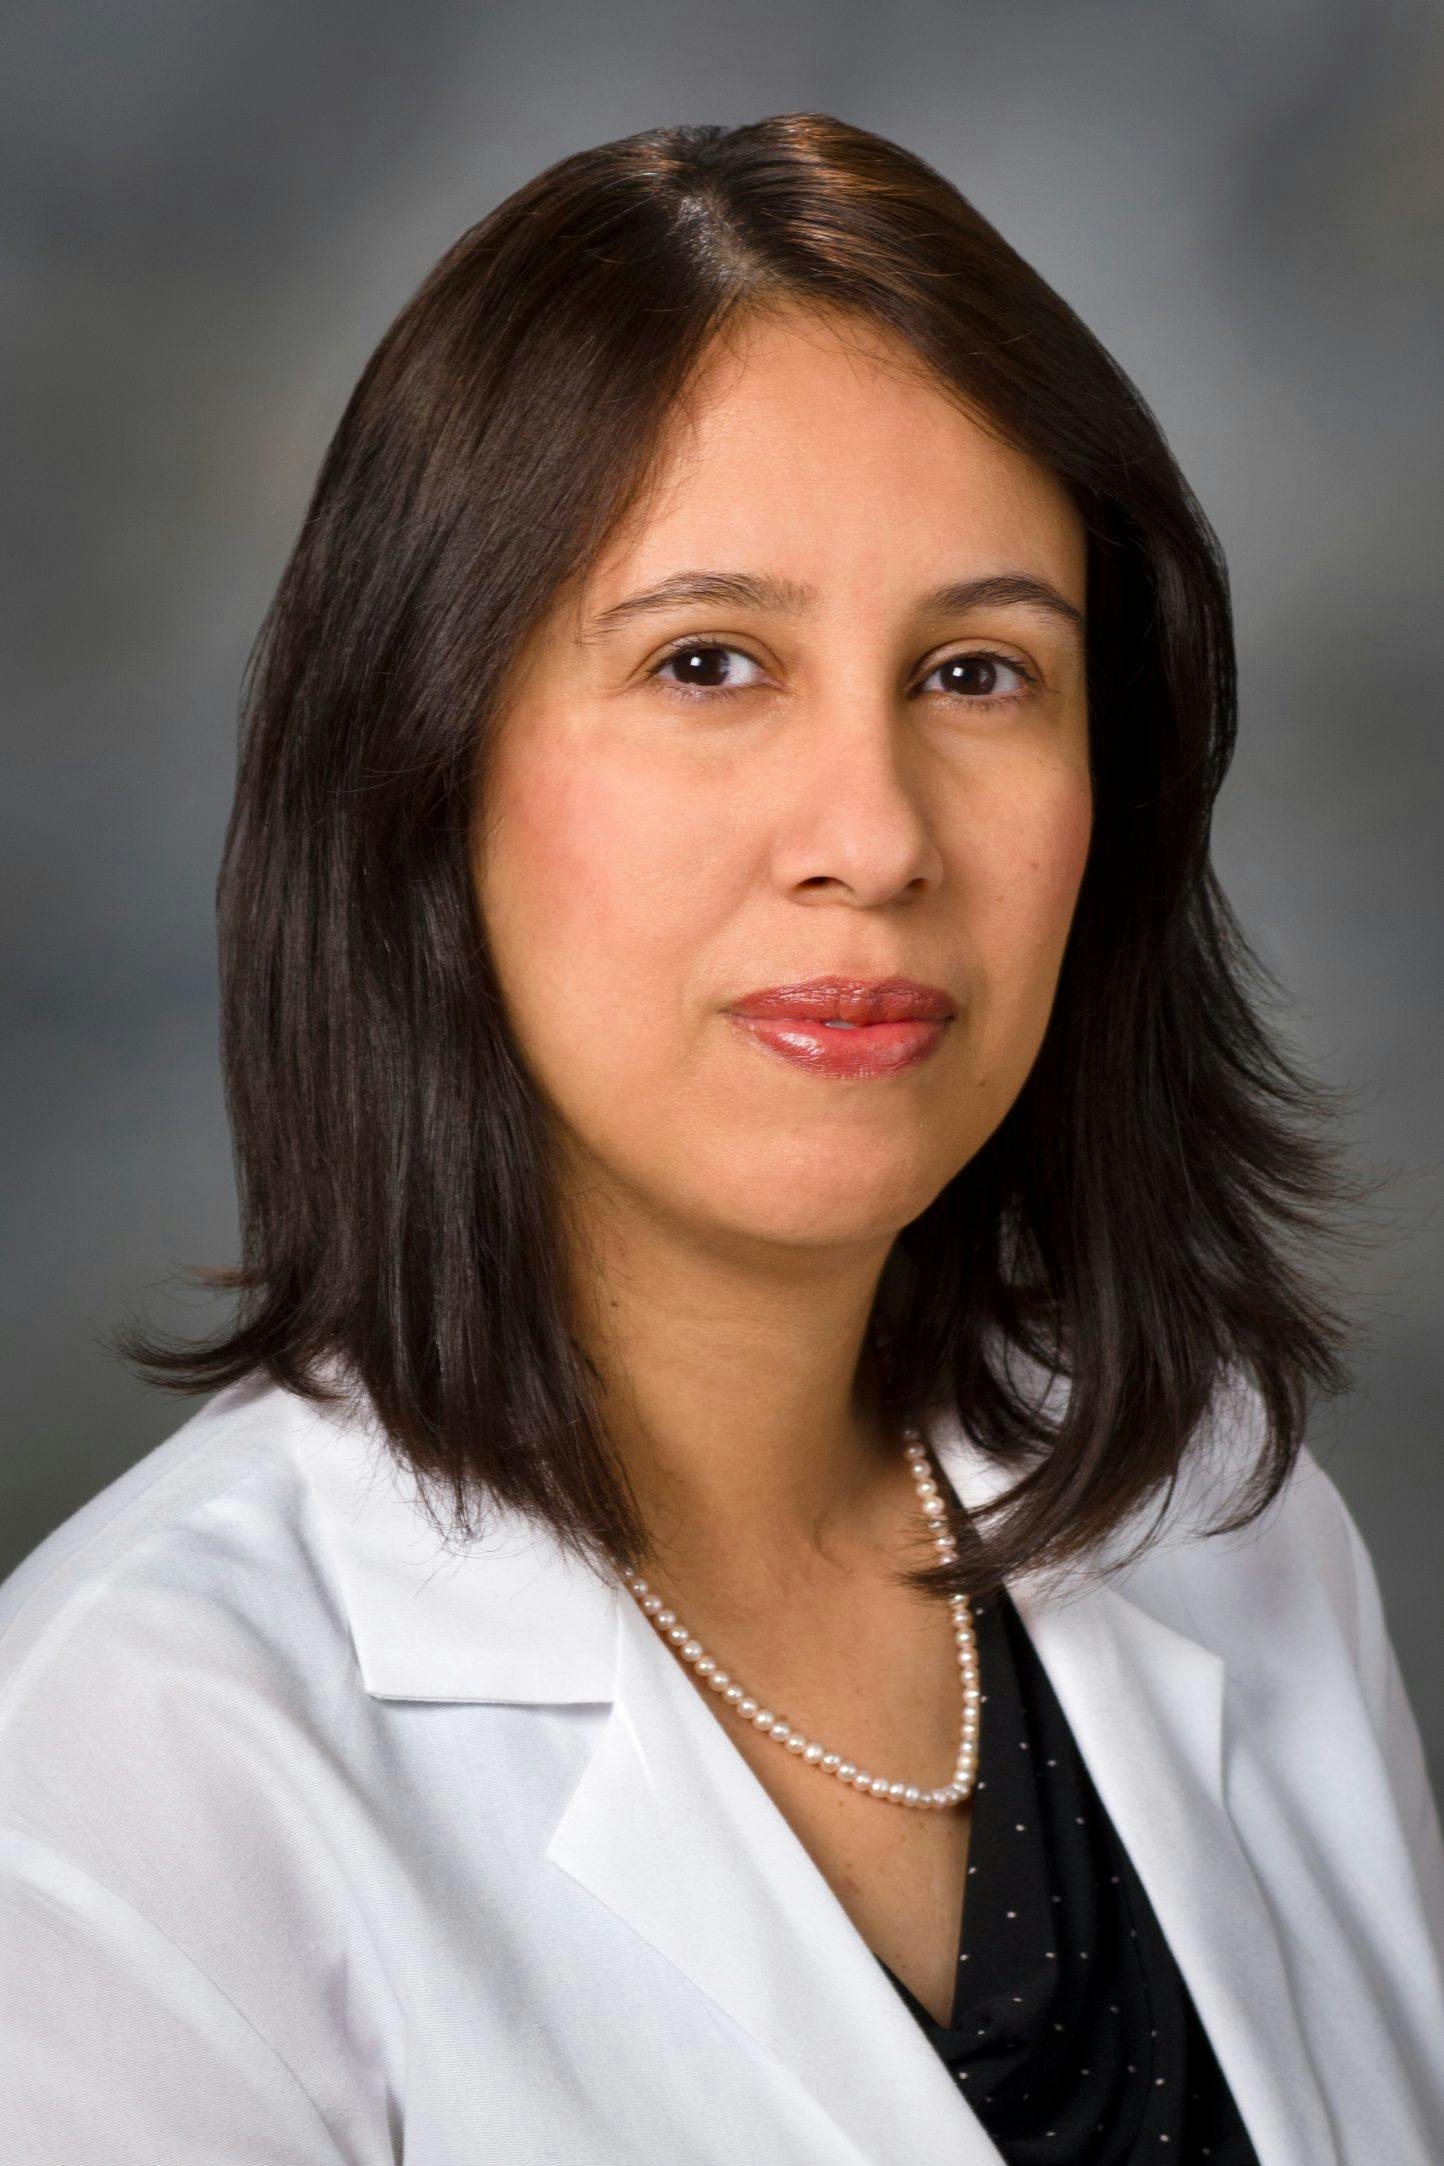 Dr. Sangeeta Goswami, assistant professor of Genitourinary Medical Oncology, The University of Texas MD Anderson Cancer Center